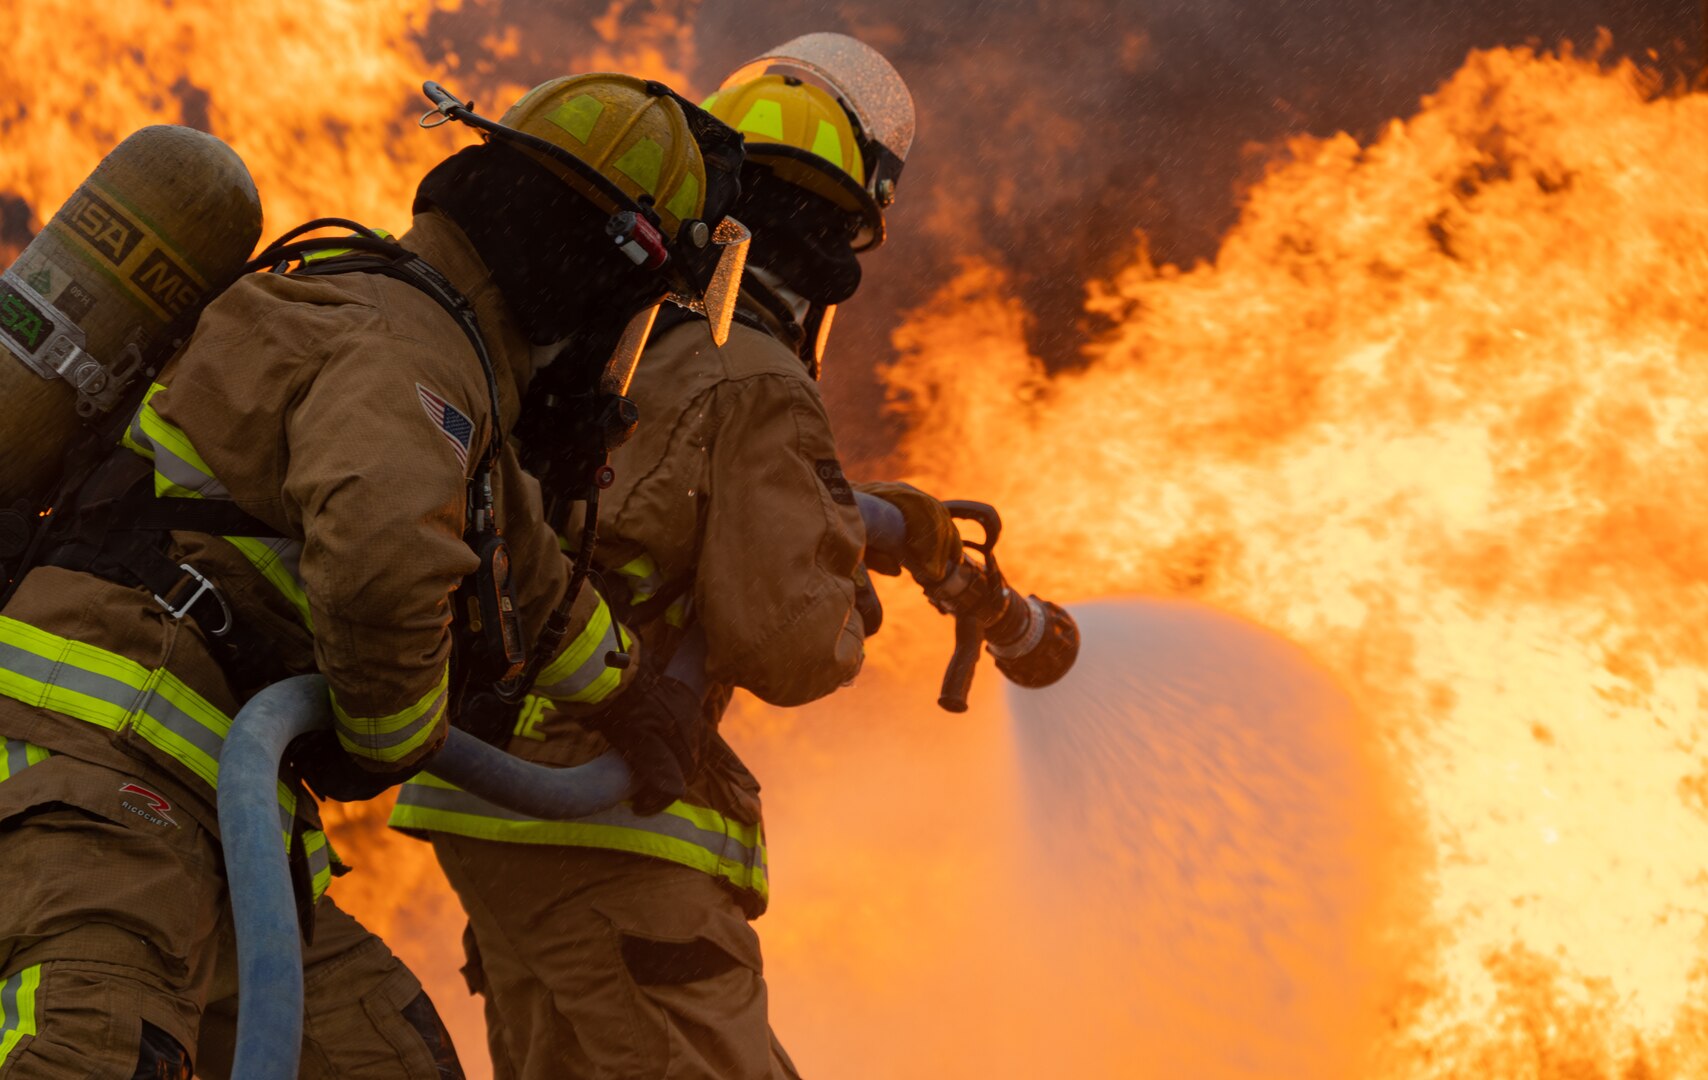 Fire protection specialists with the 152nd Civil Engineer Squadron, Nevada Air National Guard, extinguish an exterior fire of a C-130 aircraft frame during a live-burn exercise at Volk Field Air National Guard Base in Wisconsin July 7, 2021.